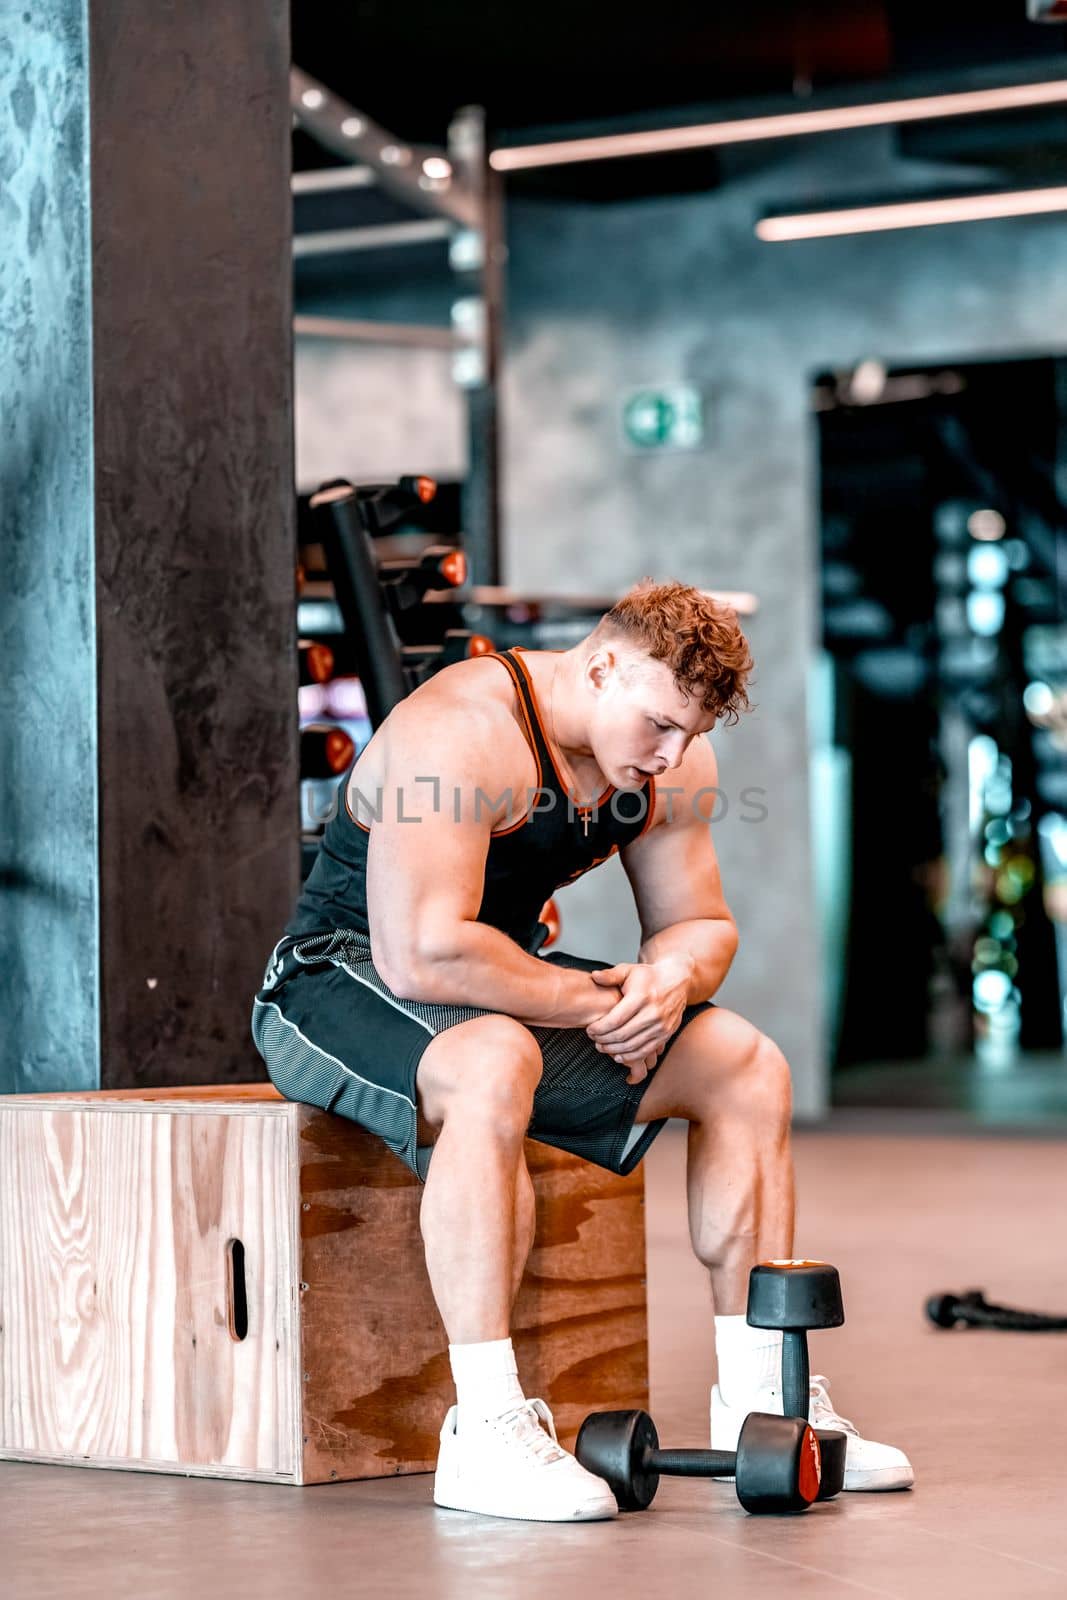 athlete resting in the gym between exercises by Edophoto